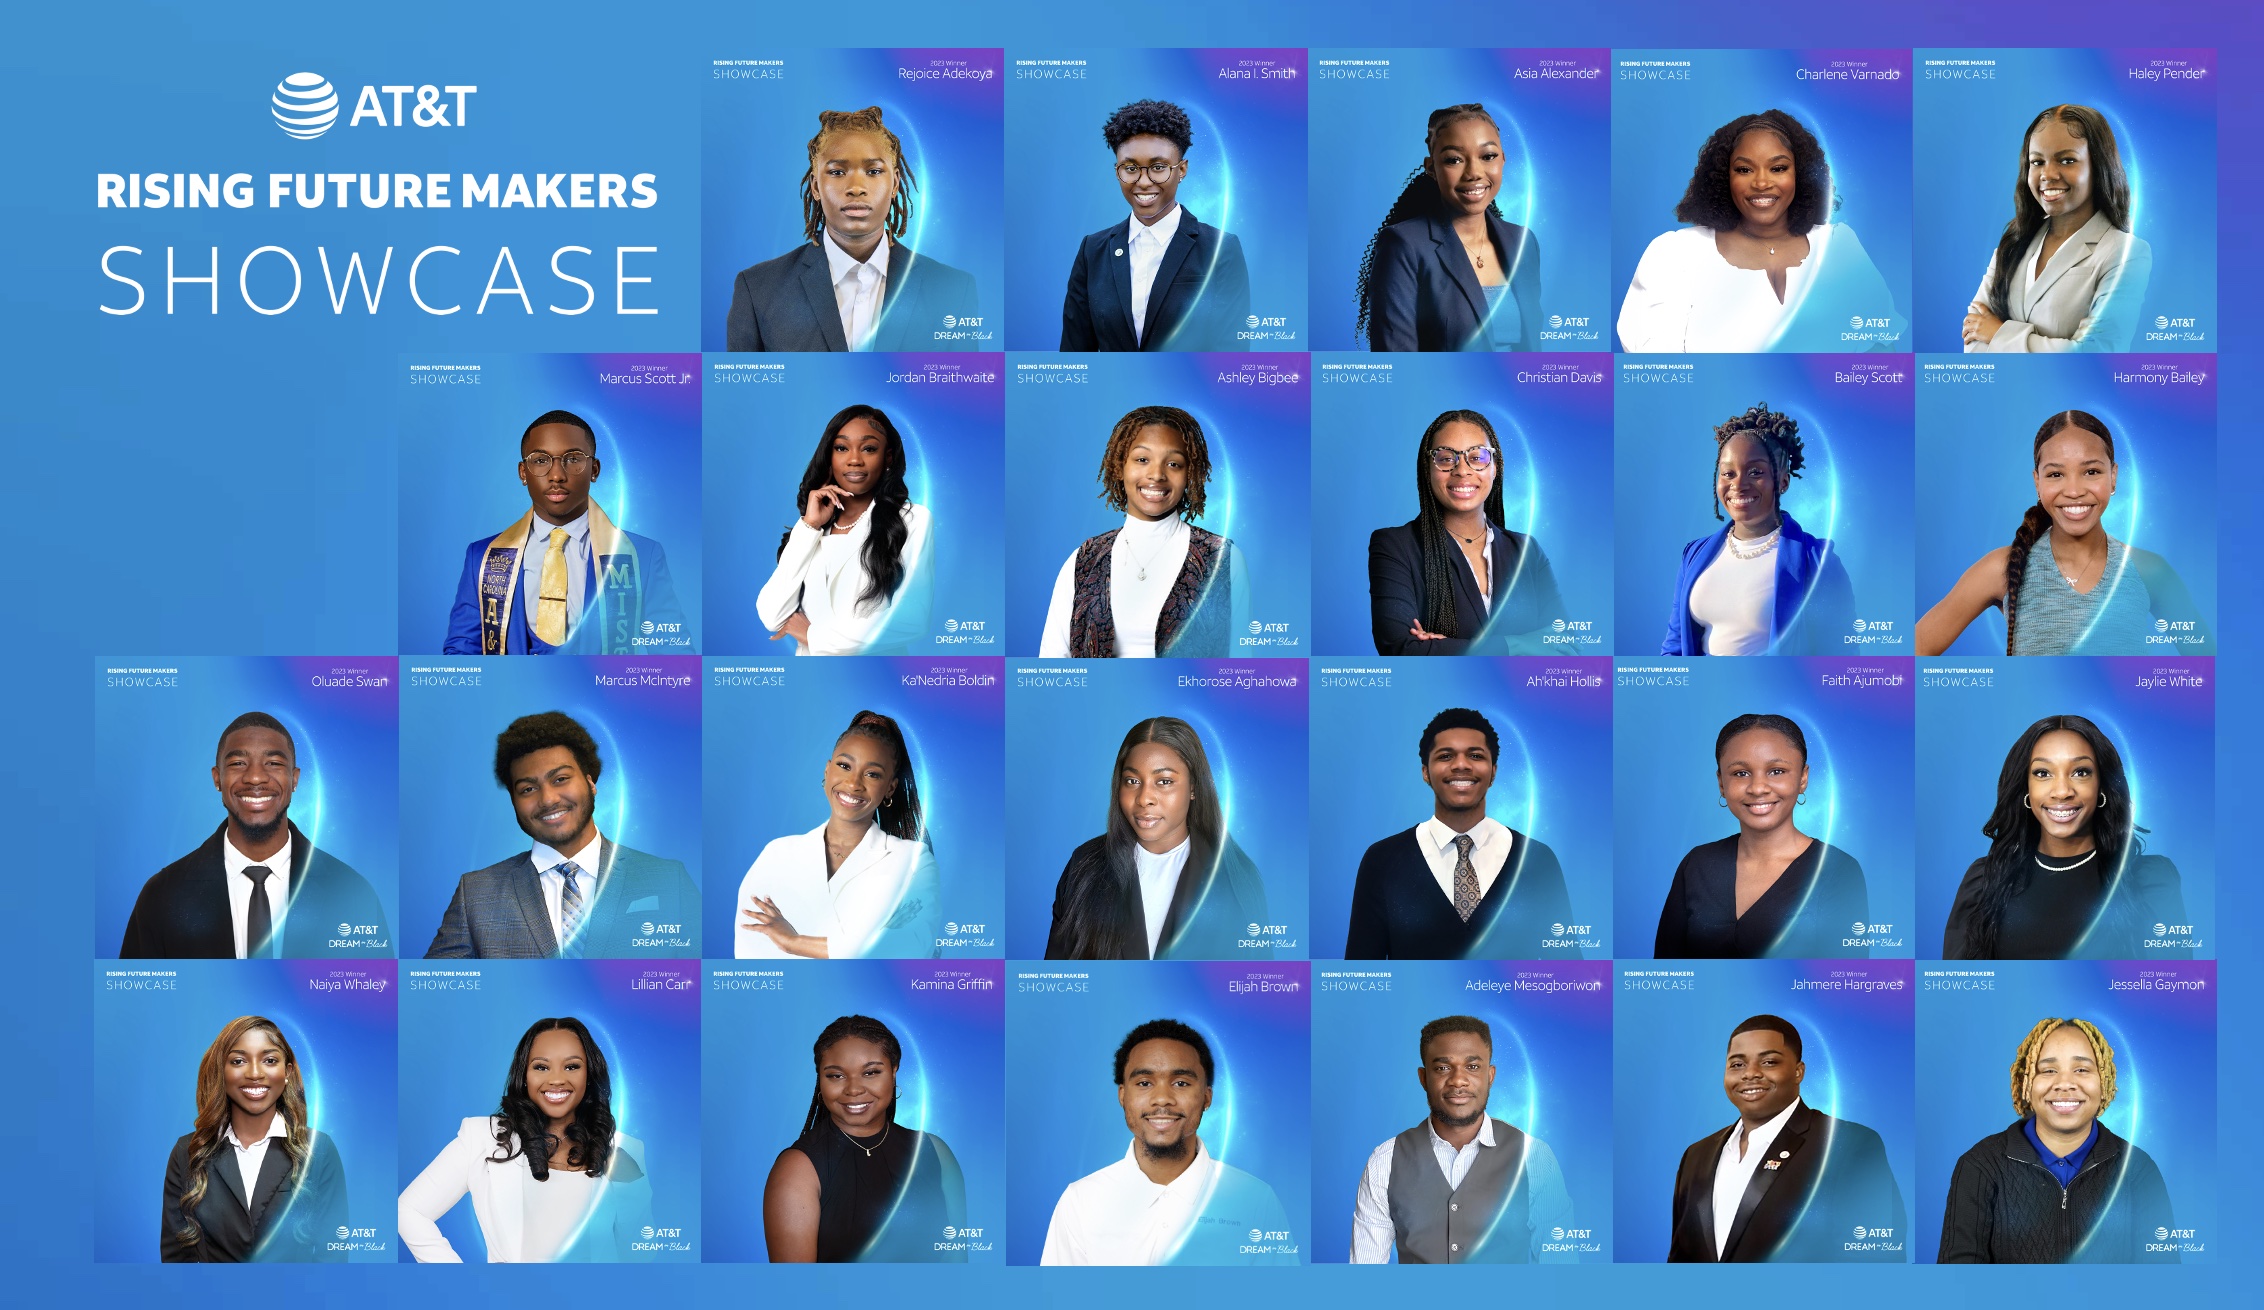 AT&T Announces Winners Of The Rising Future Makers Showcase